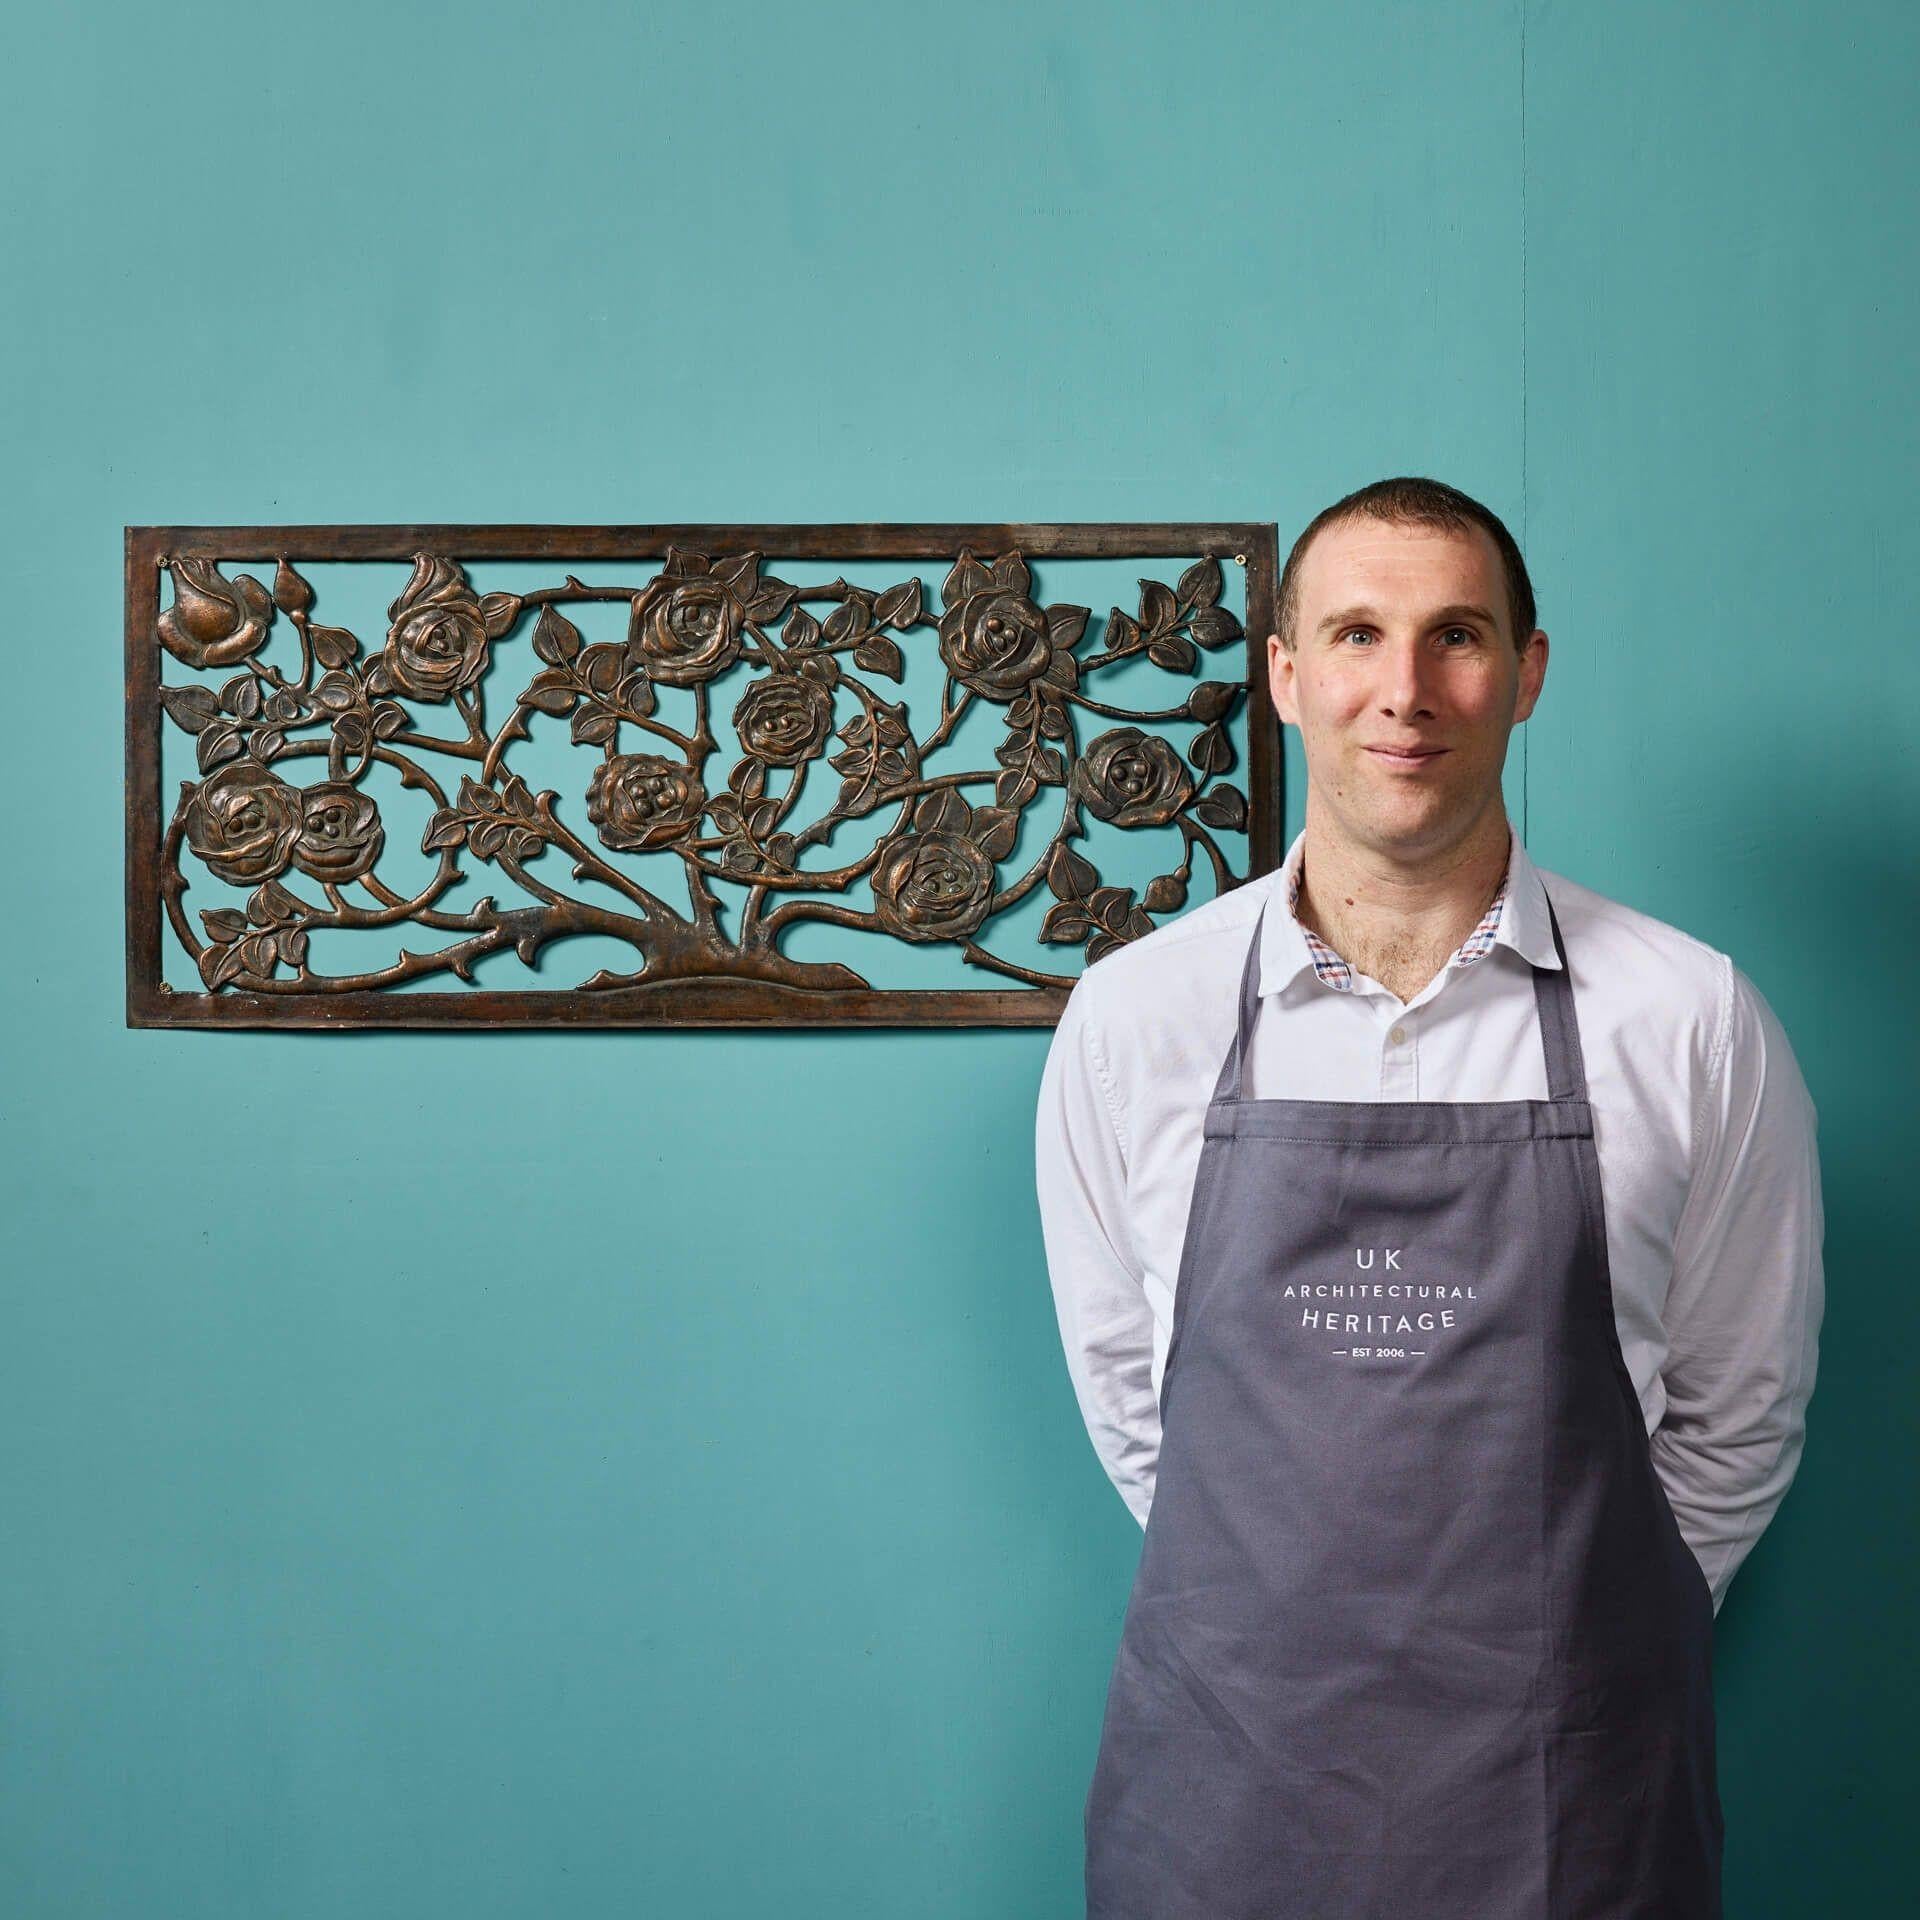 An antique handcrafted floral copper plaque, reclaimed from a country house in Somerset, England. Showcasing the French repoussé technique, this panel displays a hand-crafted detailed rose bush, accompanied by a strong copper patina finish. A